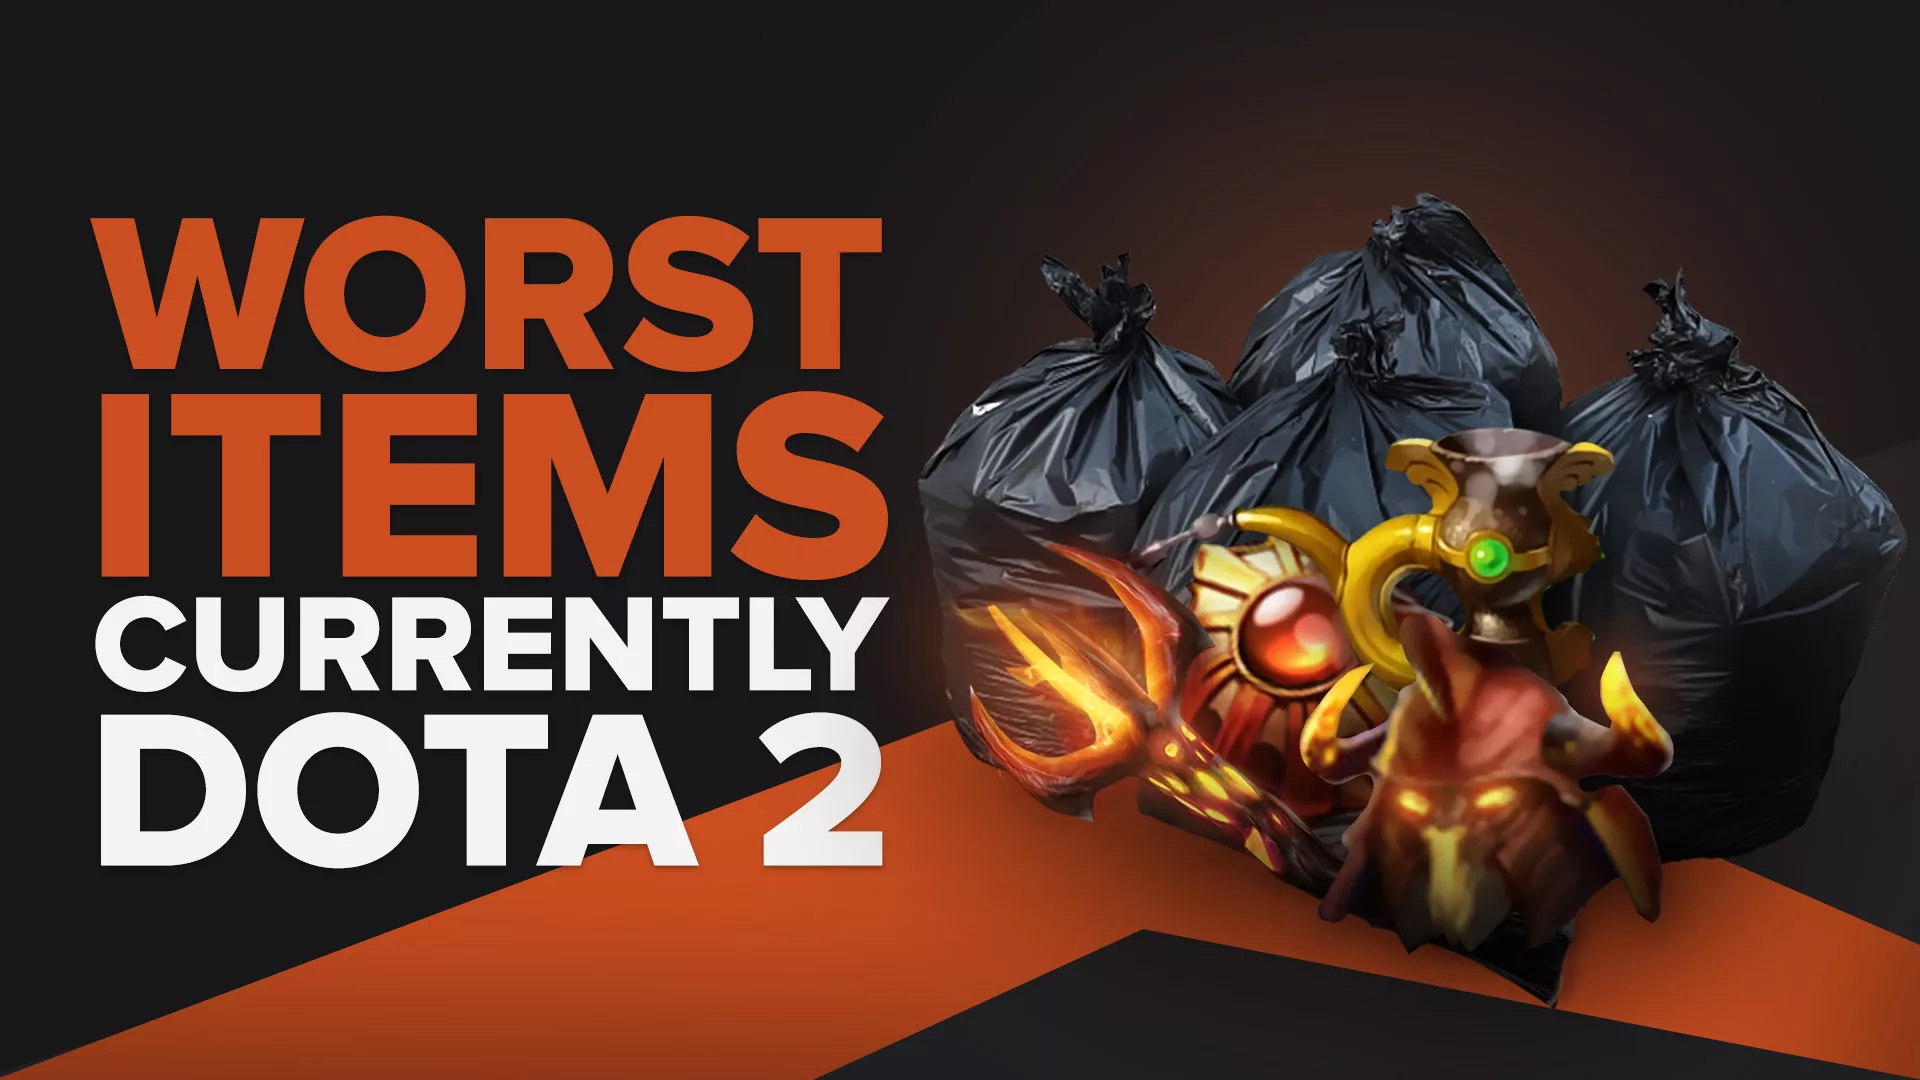 The Top 5 Worst Items in Dota Right Now